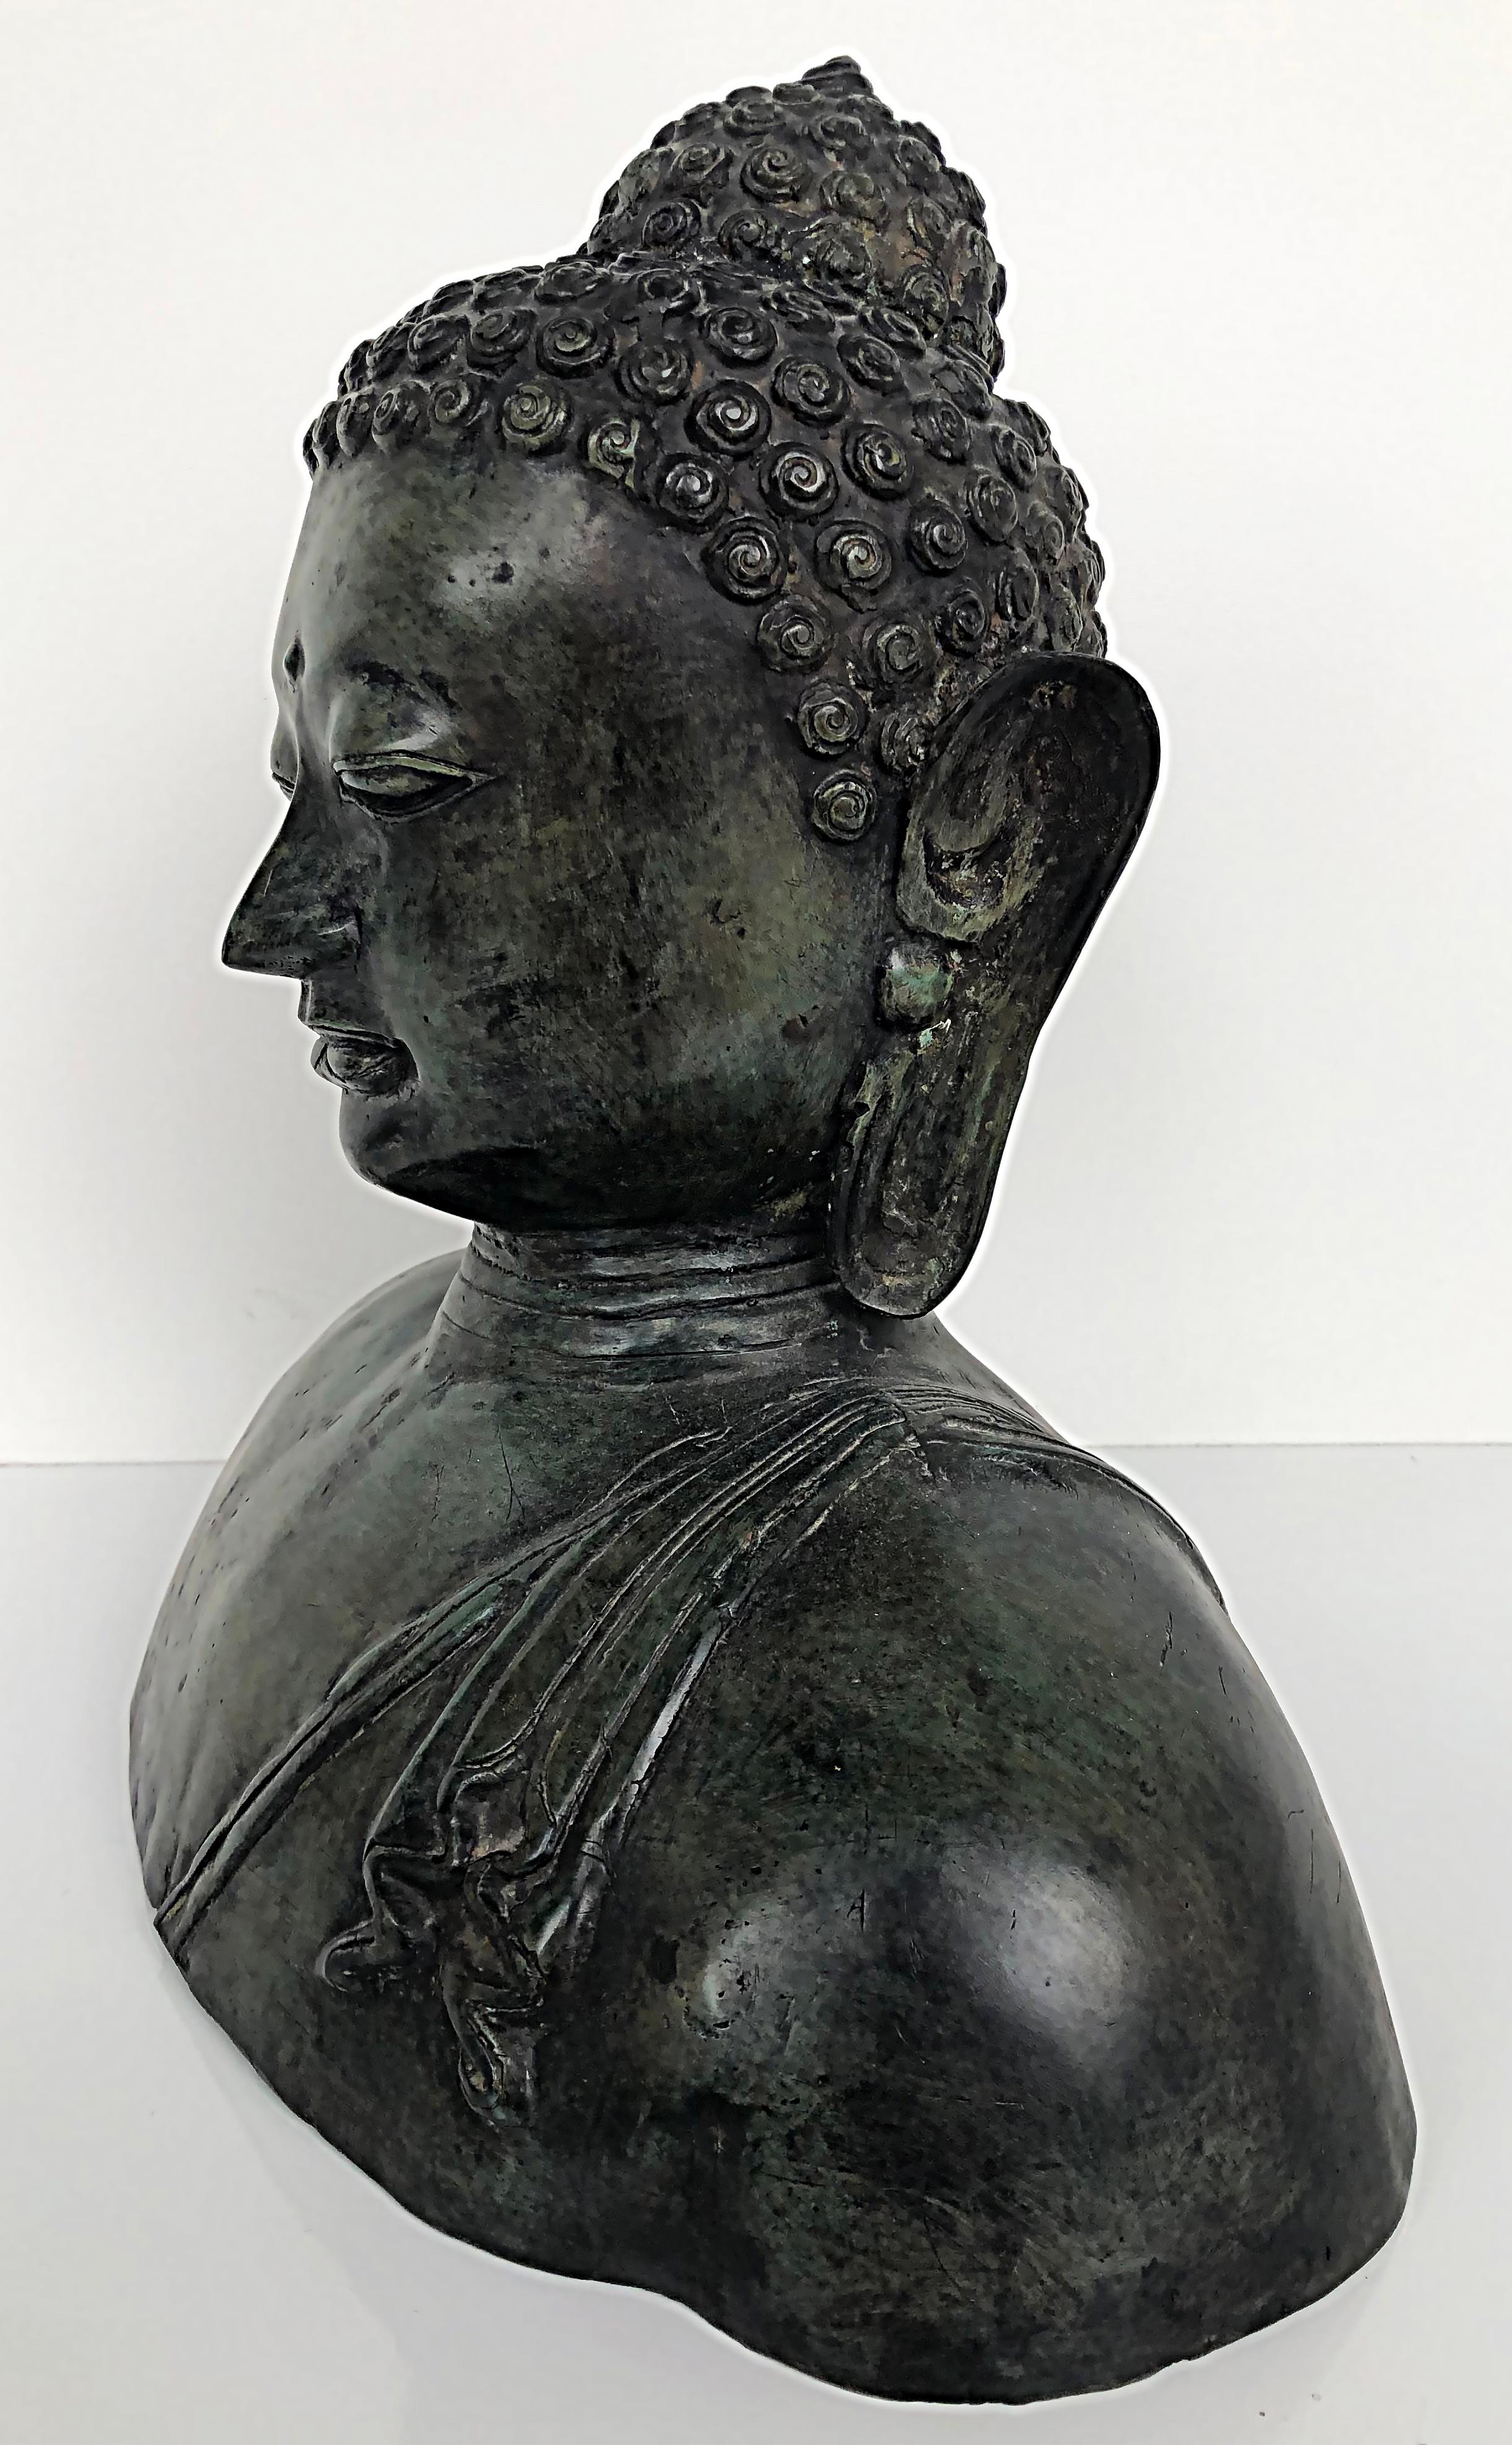 Bronze Thailand figurative buddha sculpture bust, 20th century with patina.

Offered for sale is a large and substantial bronze Buddha bust from Thailand. The bust is 2oth-century and has a rich dark green applied patina. The detail is lovely and